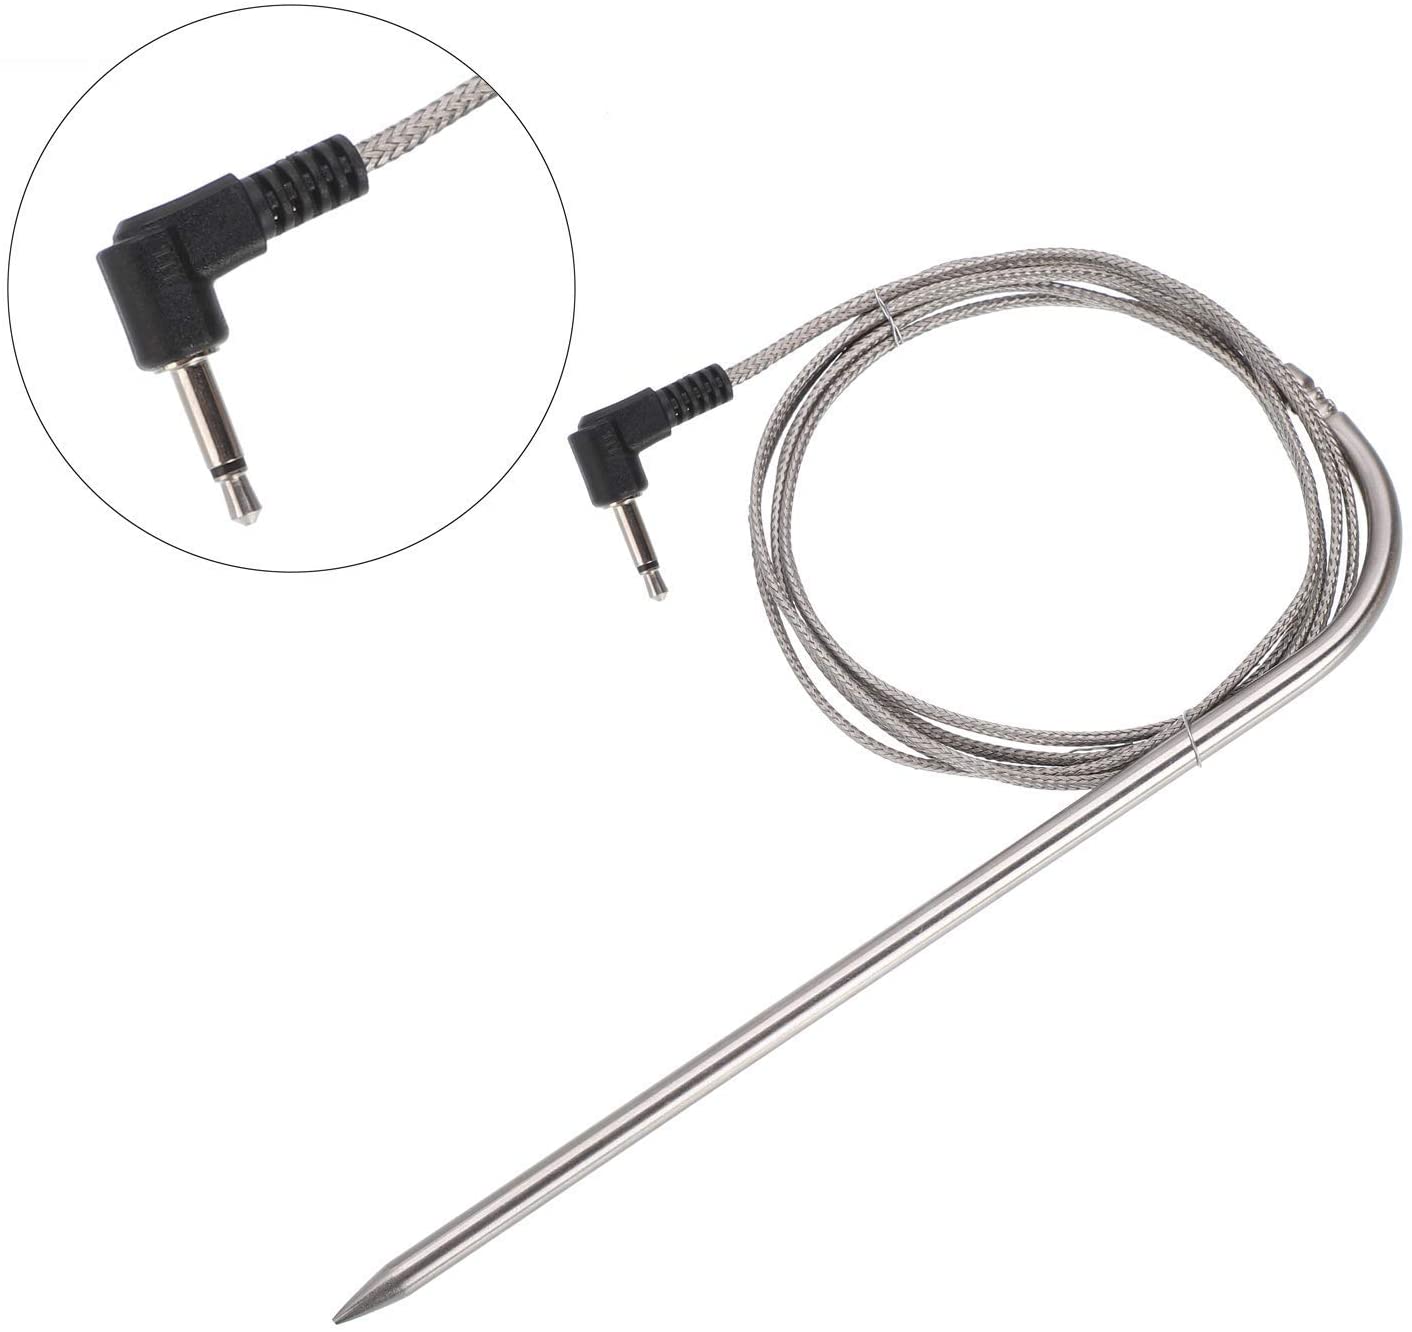 3.5mm Plug Meat Probe for Pit Boss 7 Series Vertical Smoker (PBV7P1) Grills, Replacement High Temperature BBQ Digital Thermostat Meat Probes